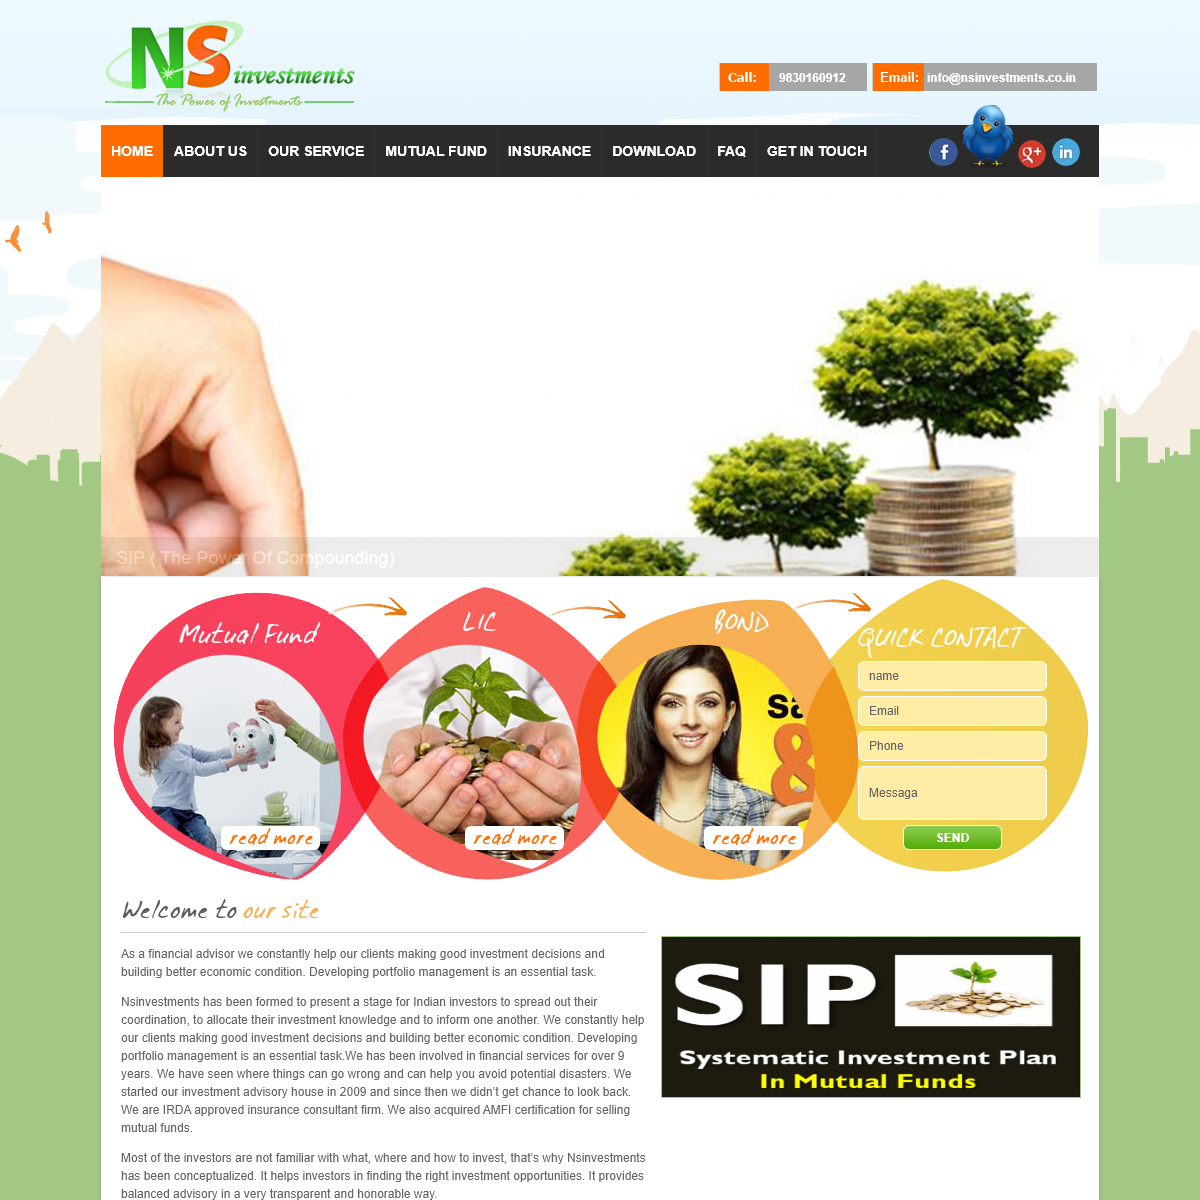 A complete backup of nsinvestments.co.in